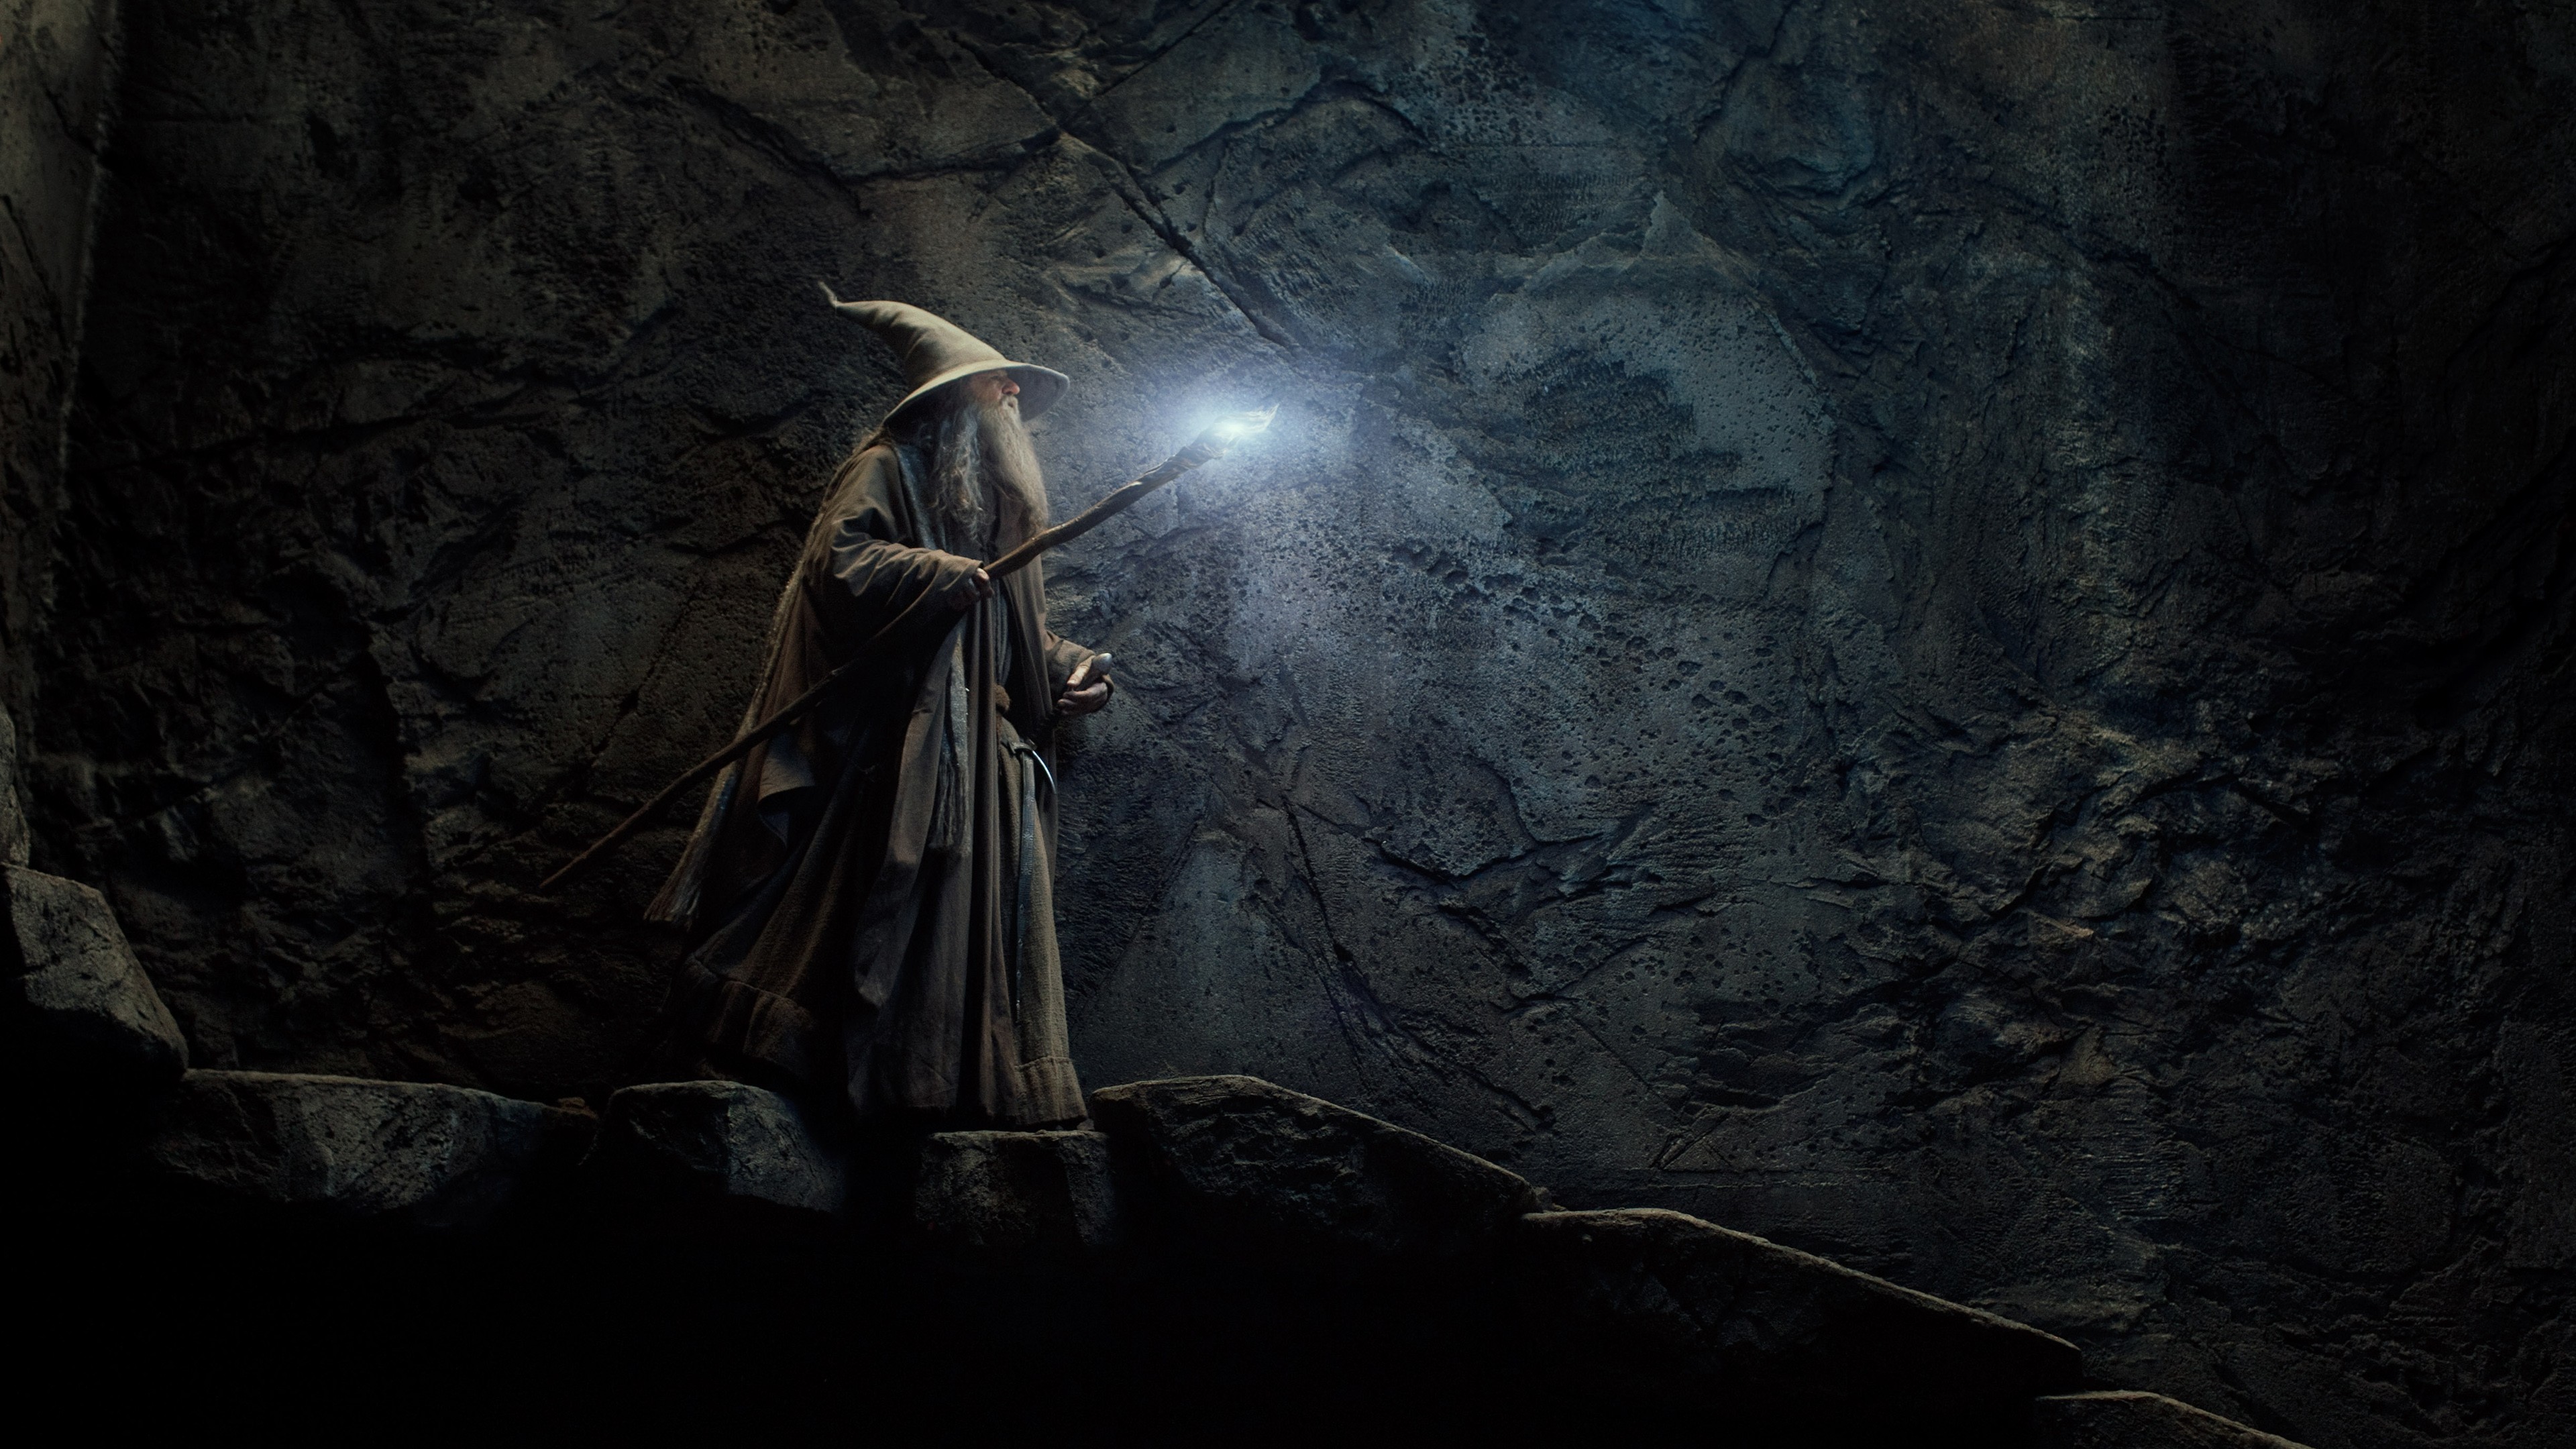 General 3840x2160 movies The Lord of the Rings The Hobbit The Hobbit: The Desolation of Smaug Gandalf film stills wizard Ian McKellen staff